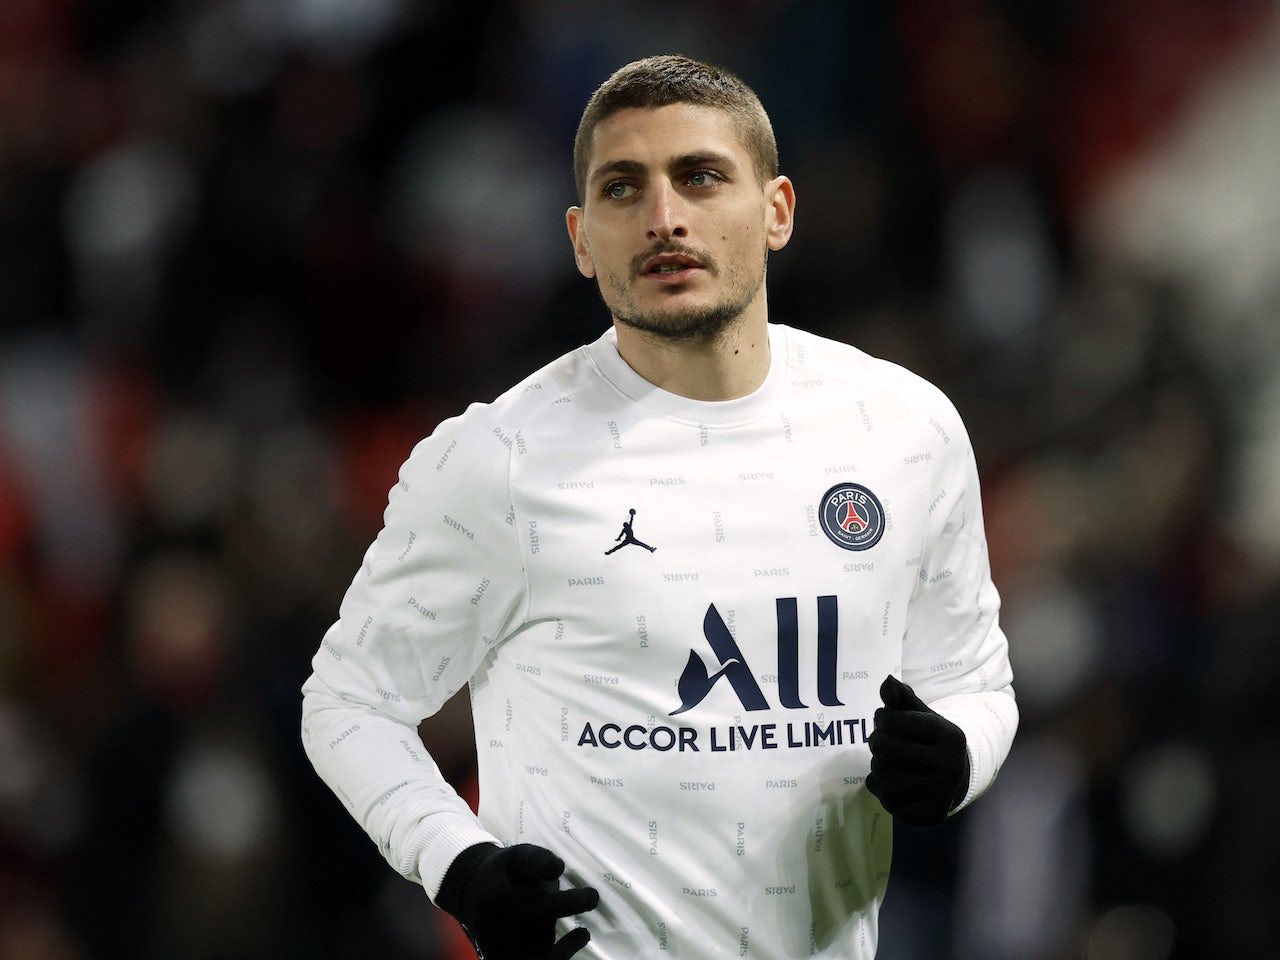 PSG vs Clermont Foot : Lineups and LIVE updates